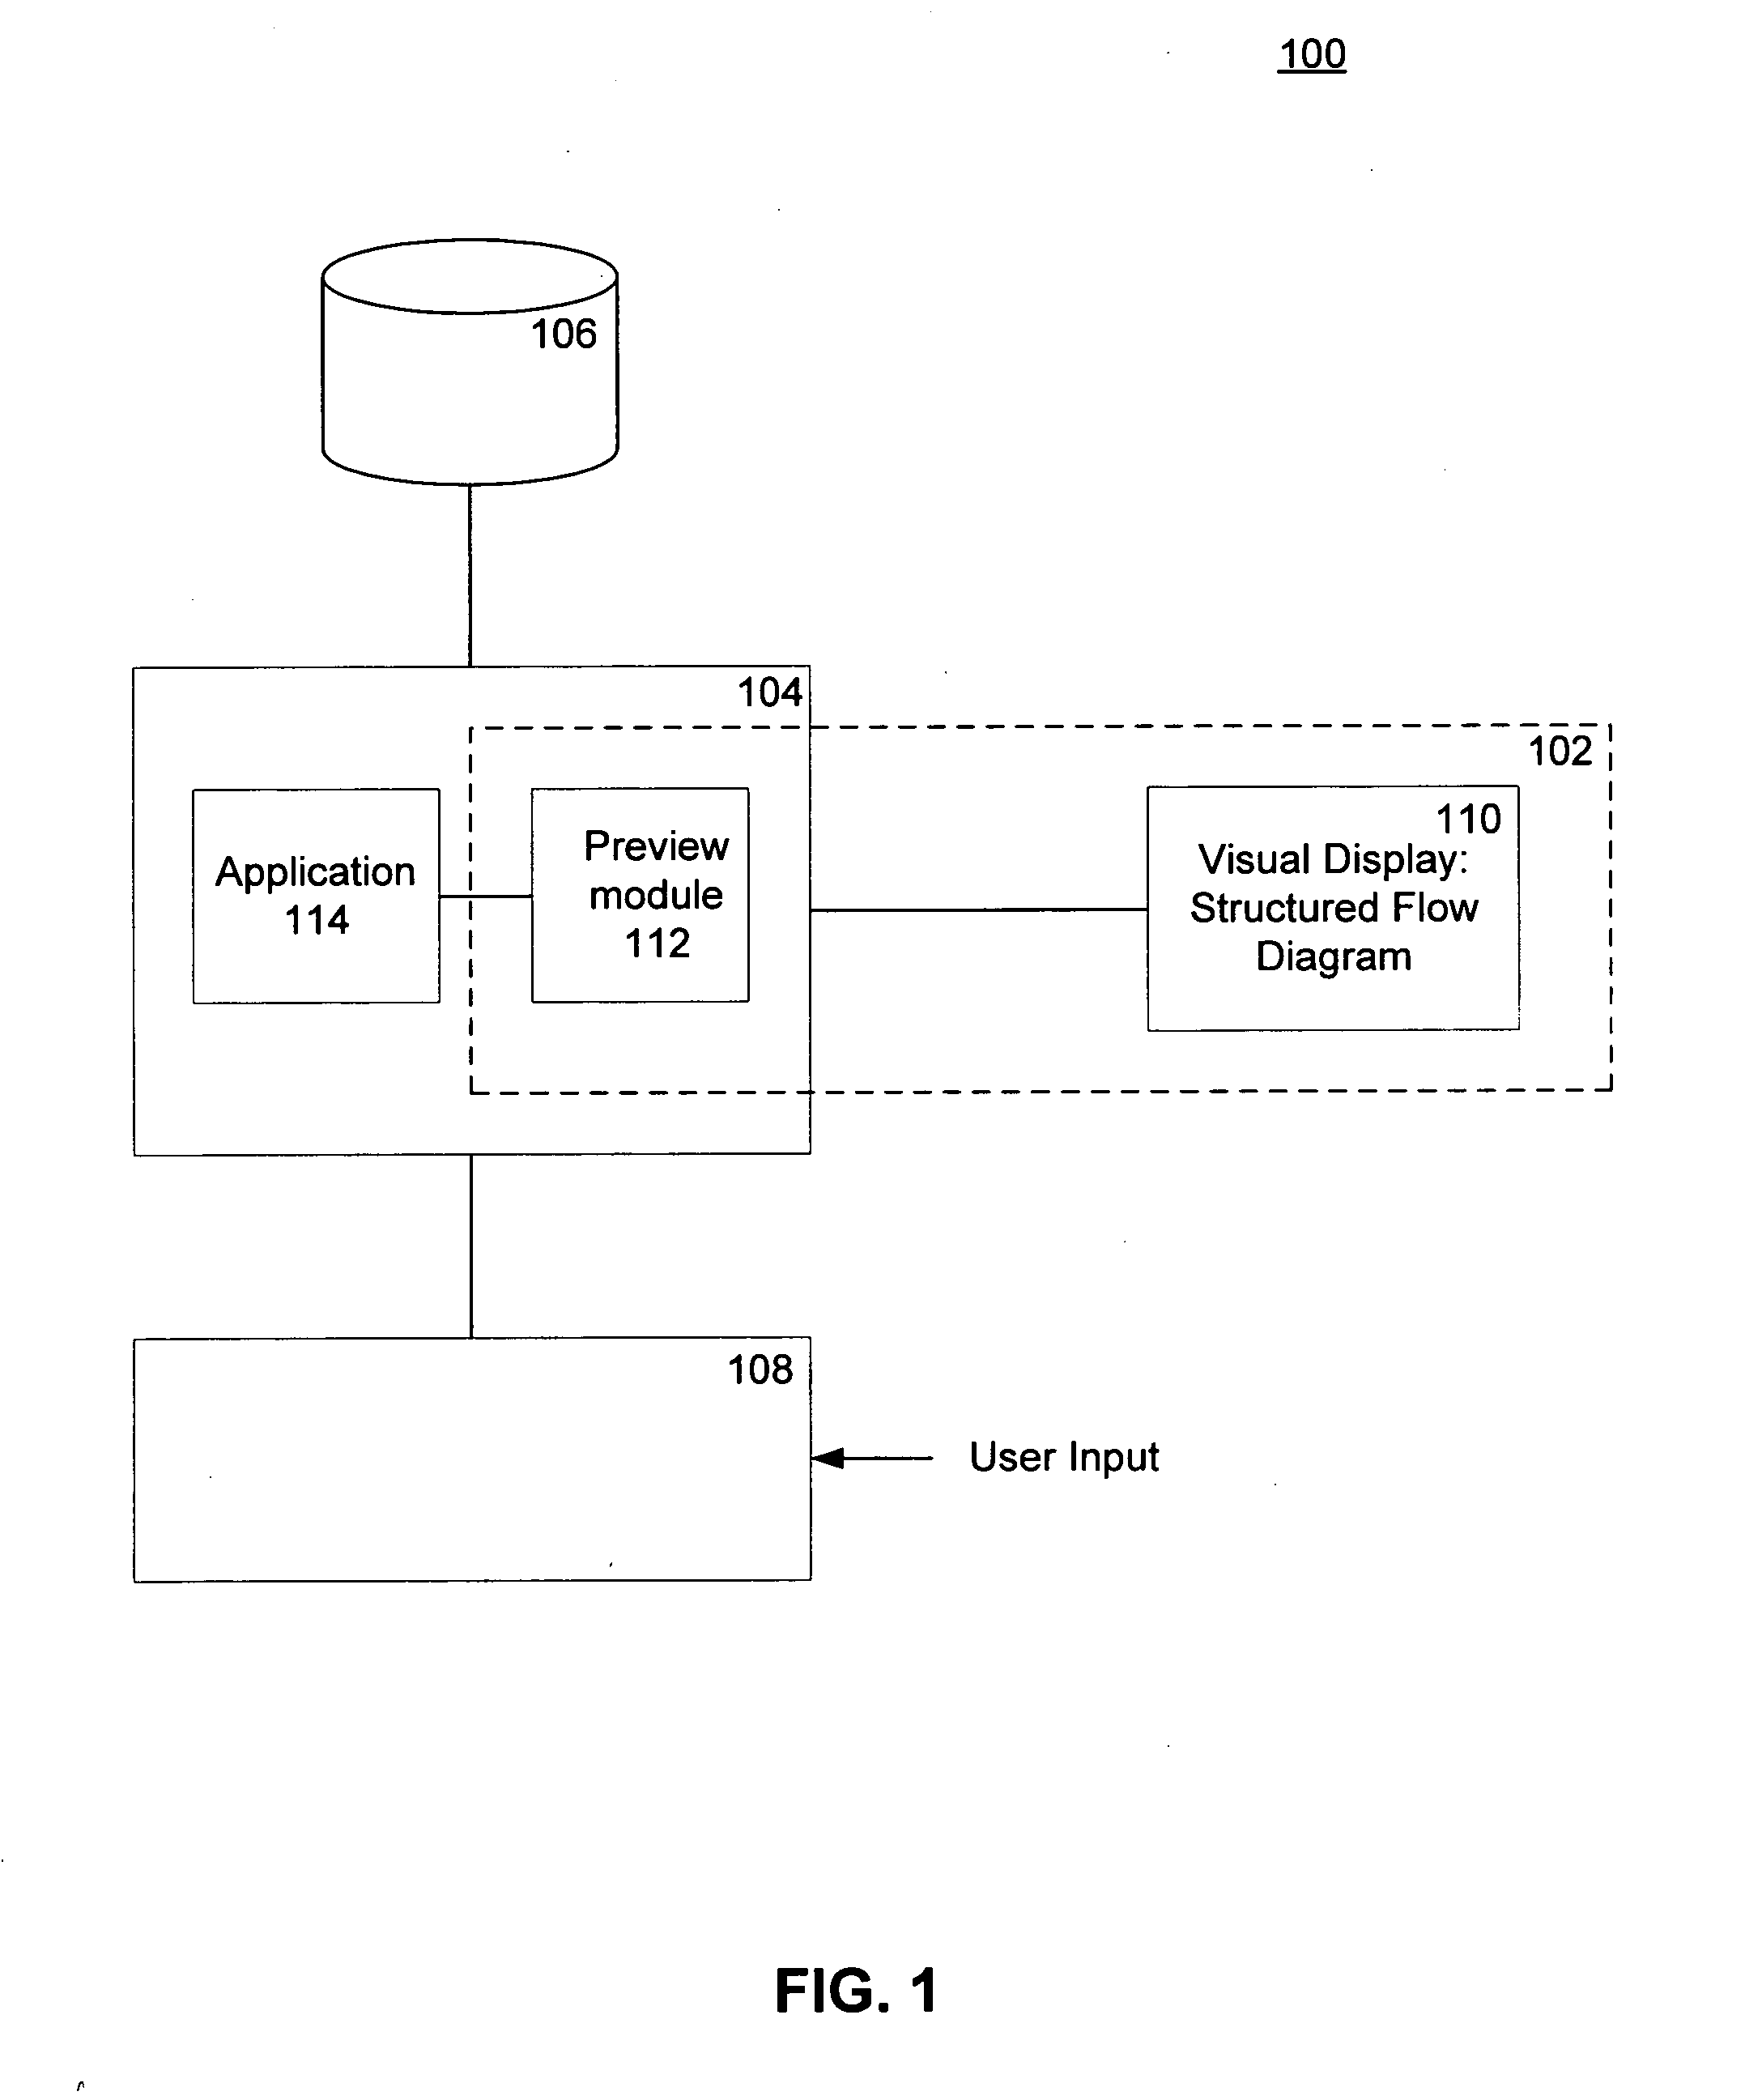 System and methods for previewing alternative compositions and arrangements when composing a strictly-structured flow diagram